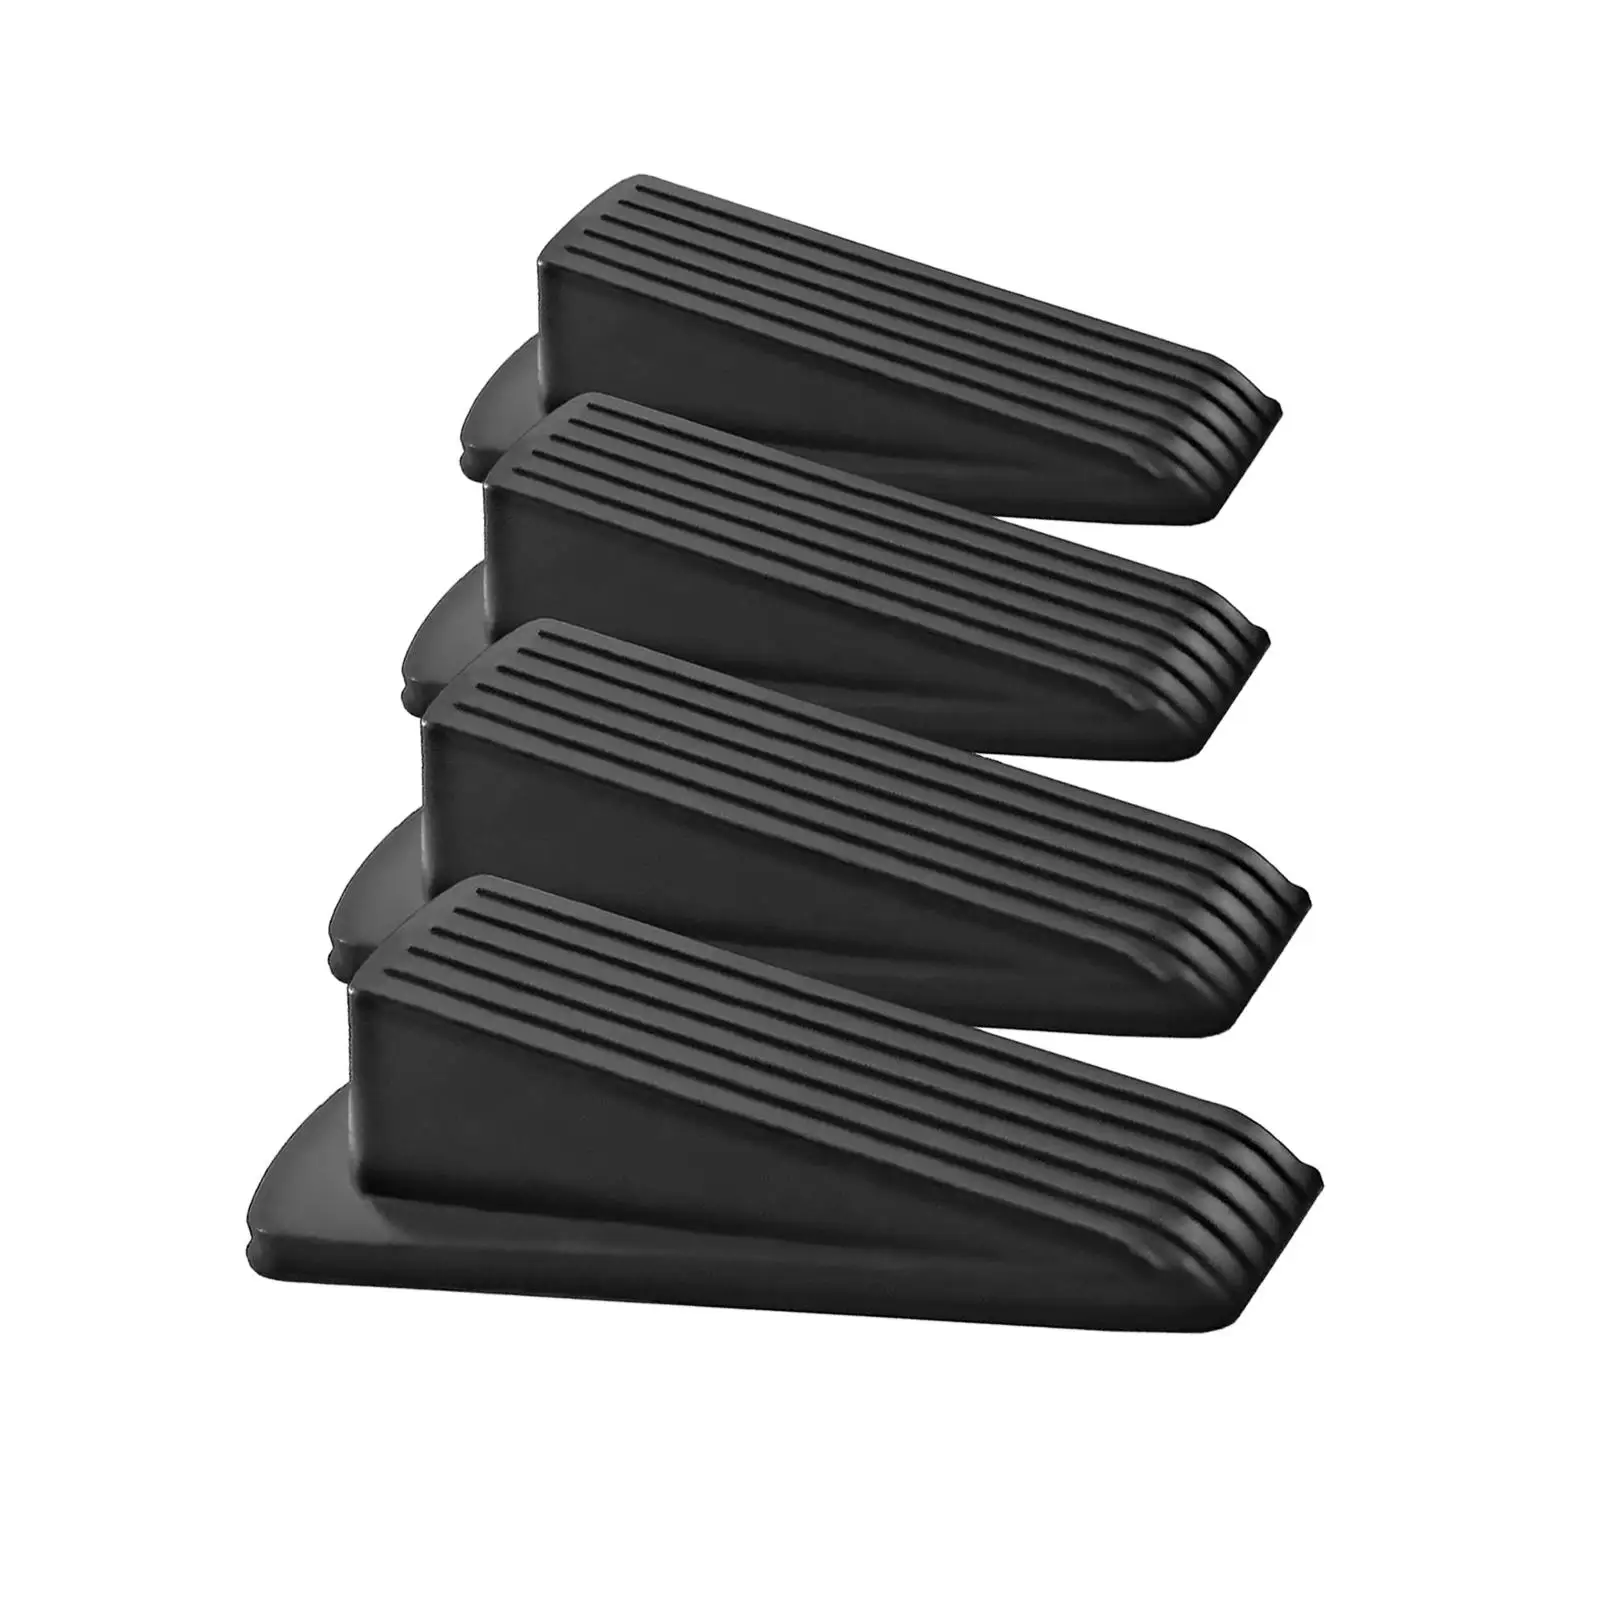 4x Rubber Door Stopper Protection Non Slip Anti Pinch Wedge Door Stop for Office Kitchen Hotel Commercial Residential